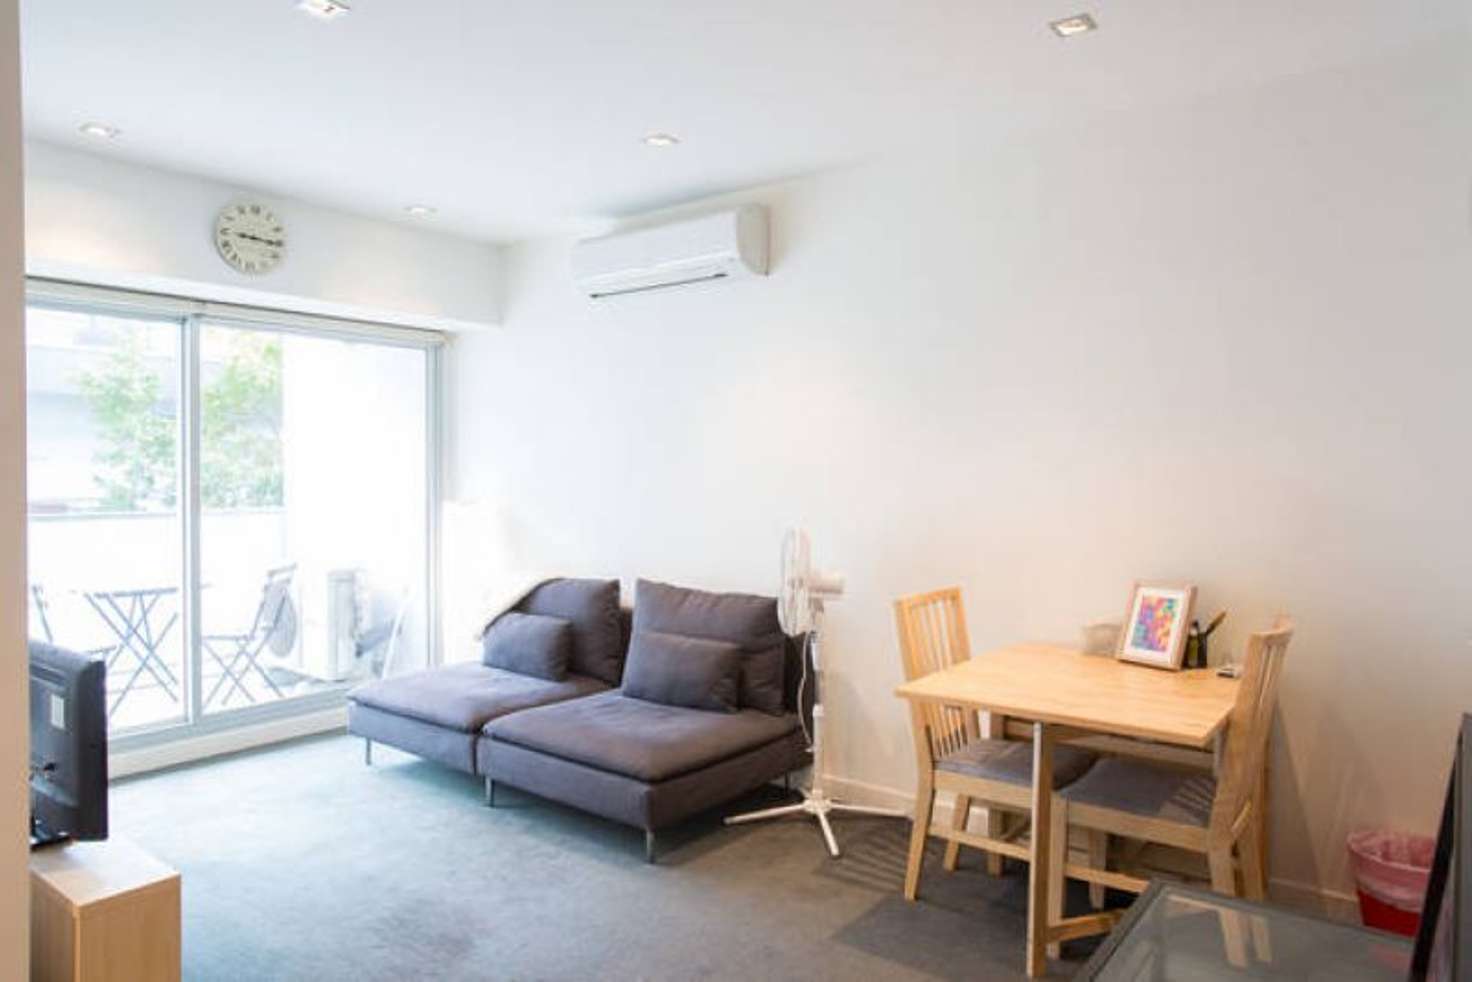 Main view of Homely apartment listing, 216/135 Inkerman St, St Kilda VIC 3182